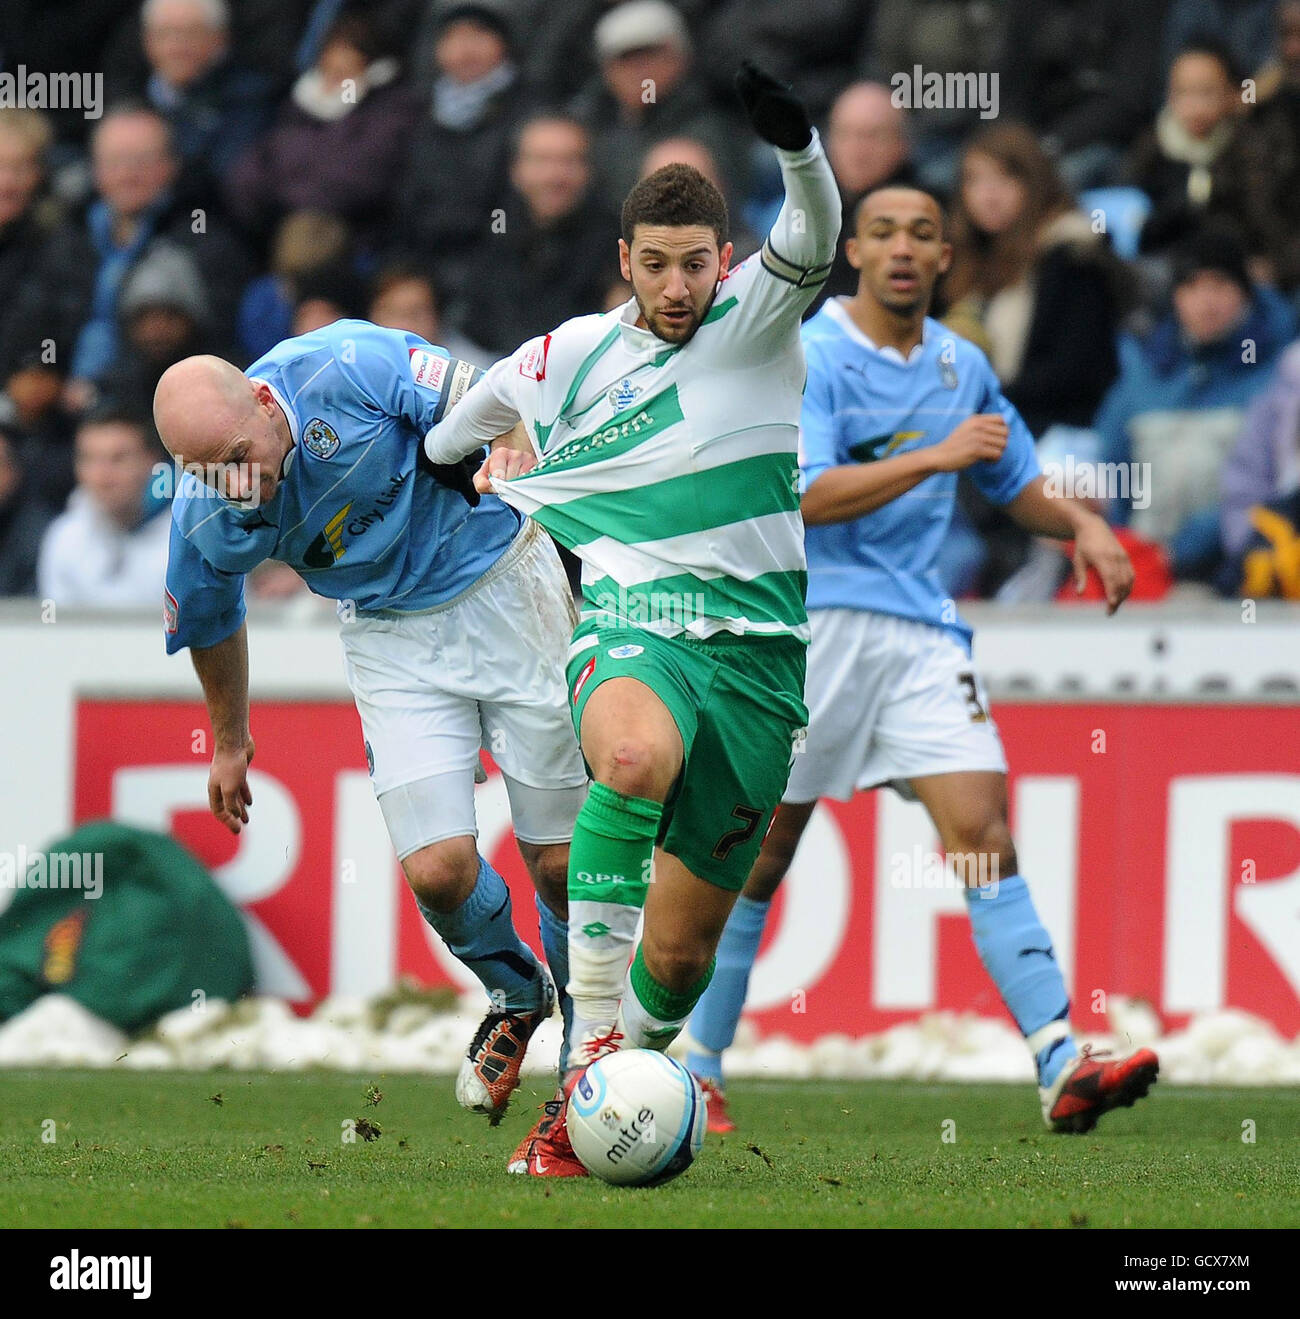 Coventry City's Lee Carsley pulls back Queens Park Rangers' Adel Taarabt (centre) during the npower Championship match at the Ricoh Arena, Coventry. Stock Photo